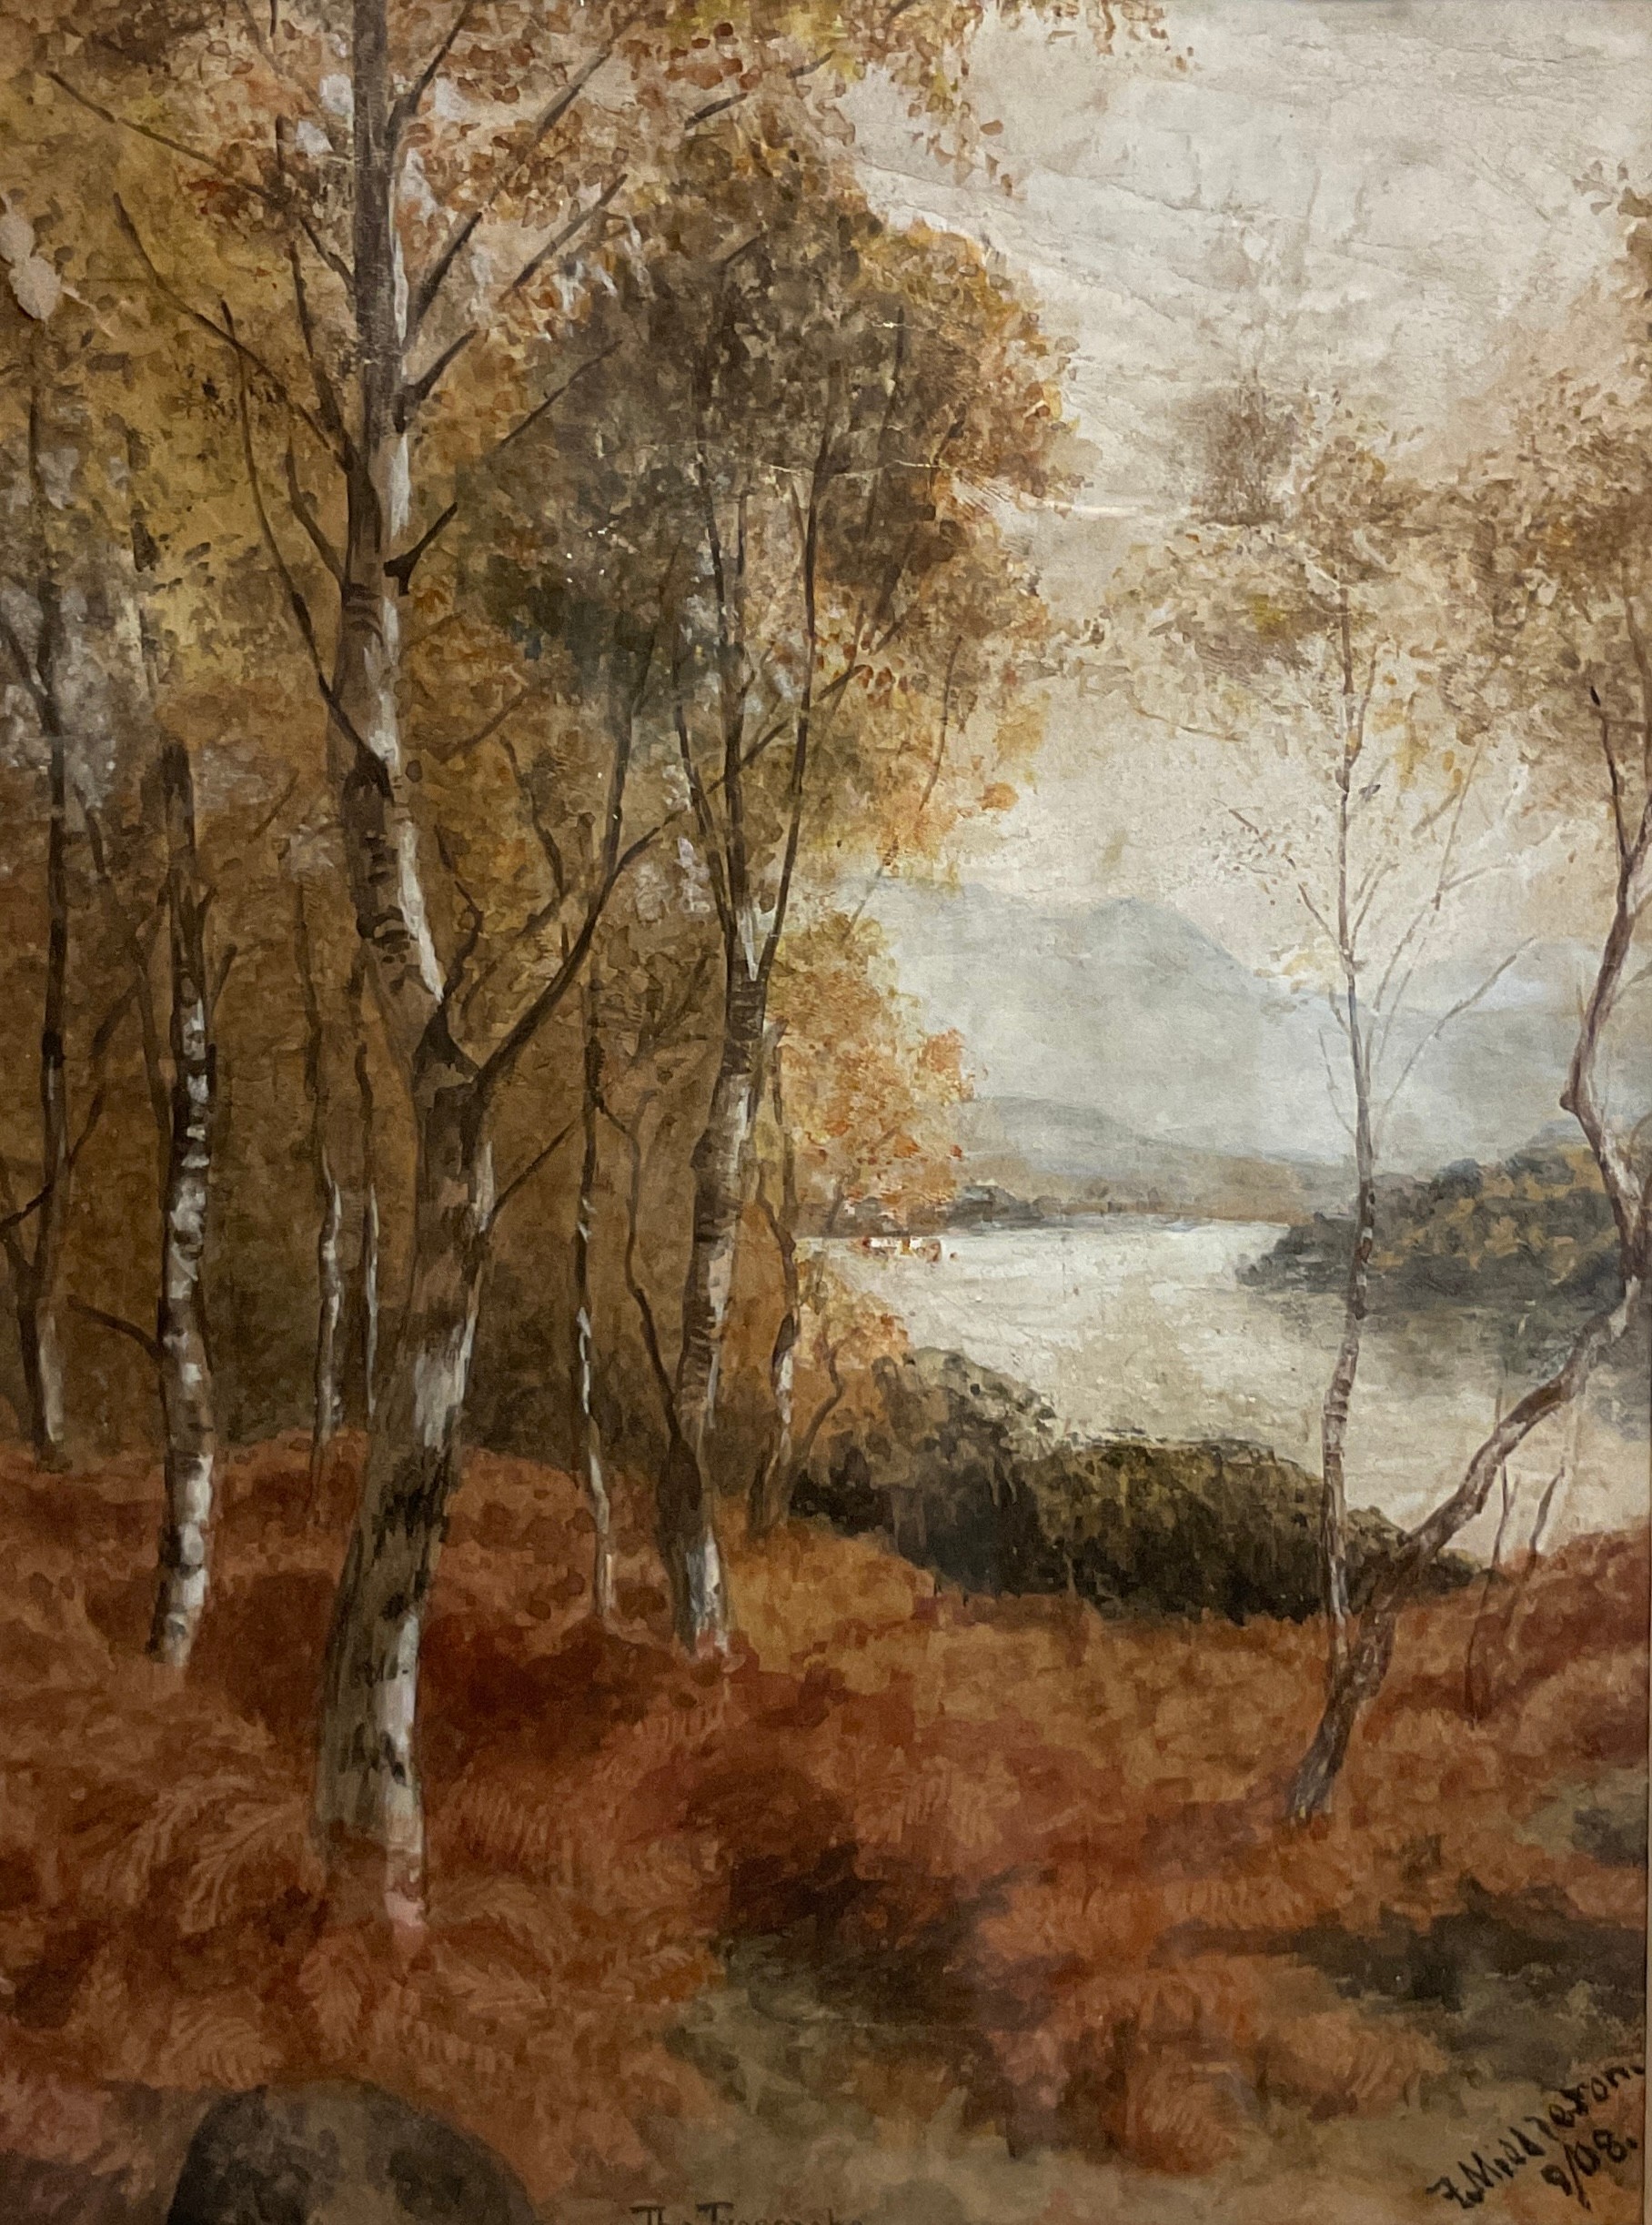 Frank Middleton, The Trossachs, signed, dated 1908, watercolour, 20cm x 15cm. - Image 2 of 2